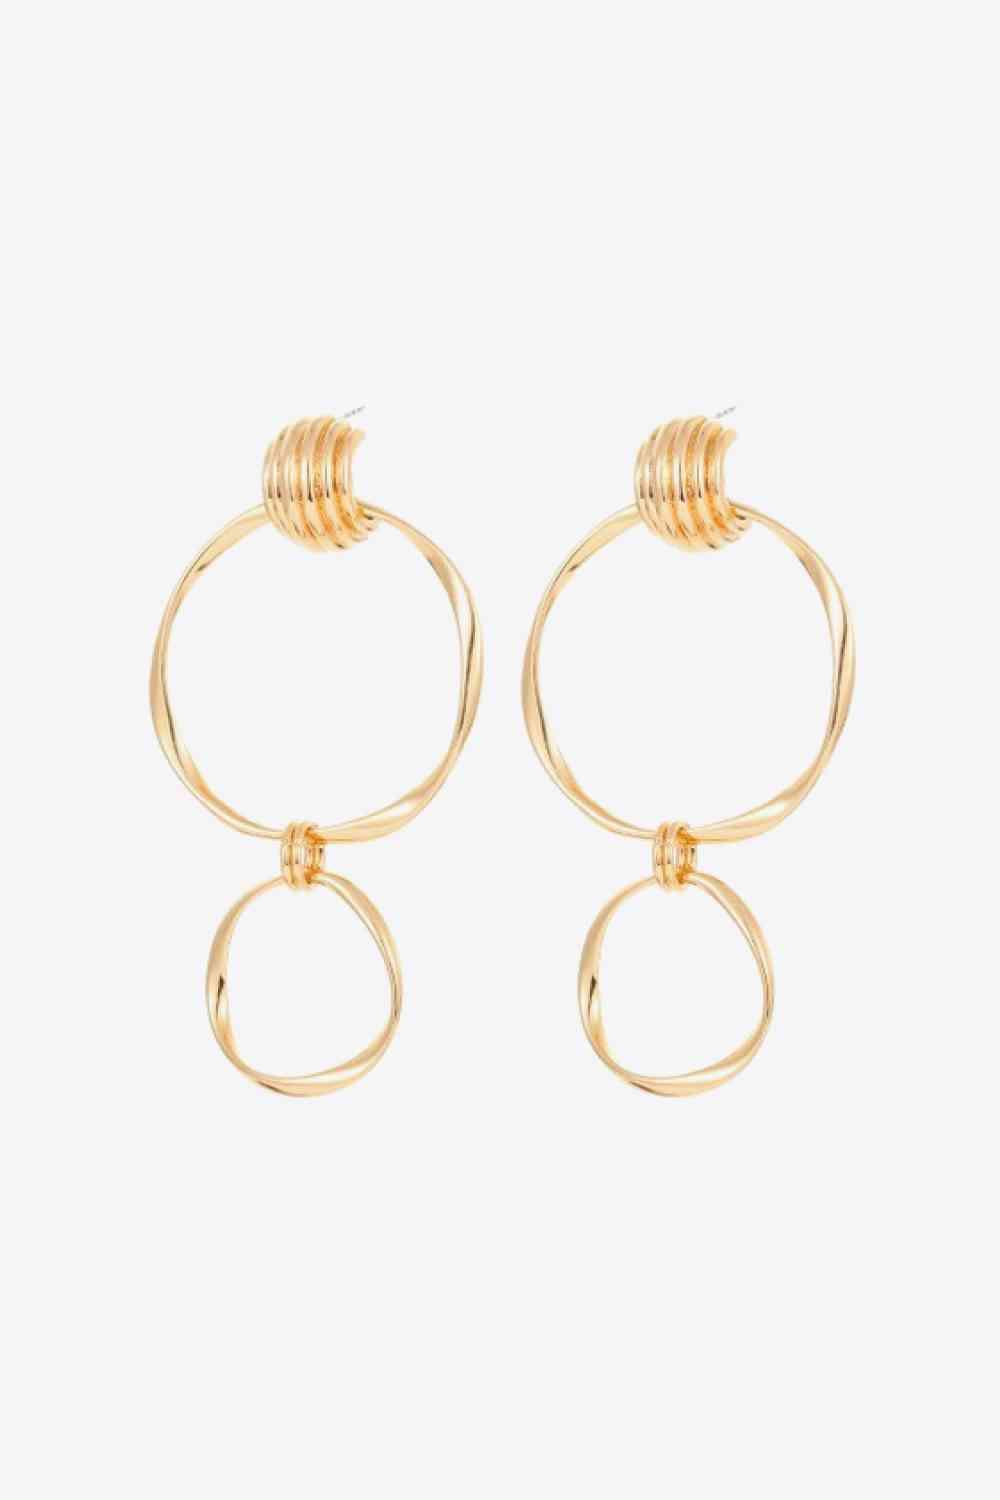 Get Noticed with Stylish Hoop Drop Earrings - Classic & Modern Pick!